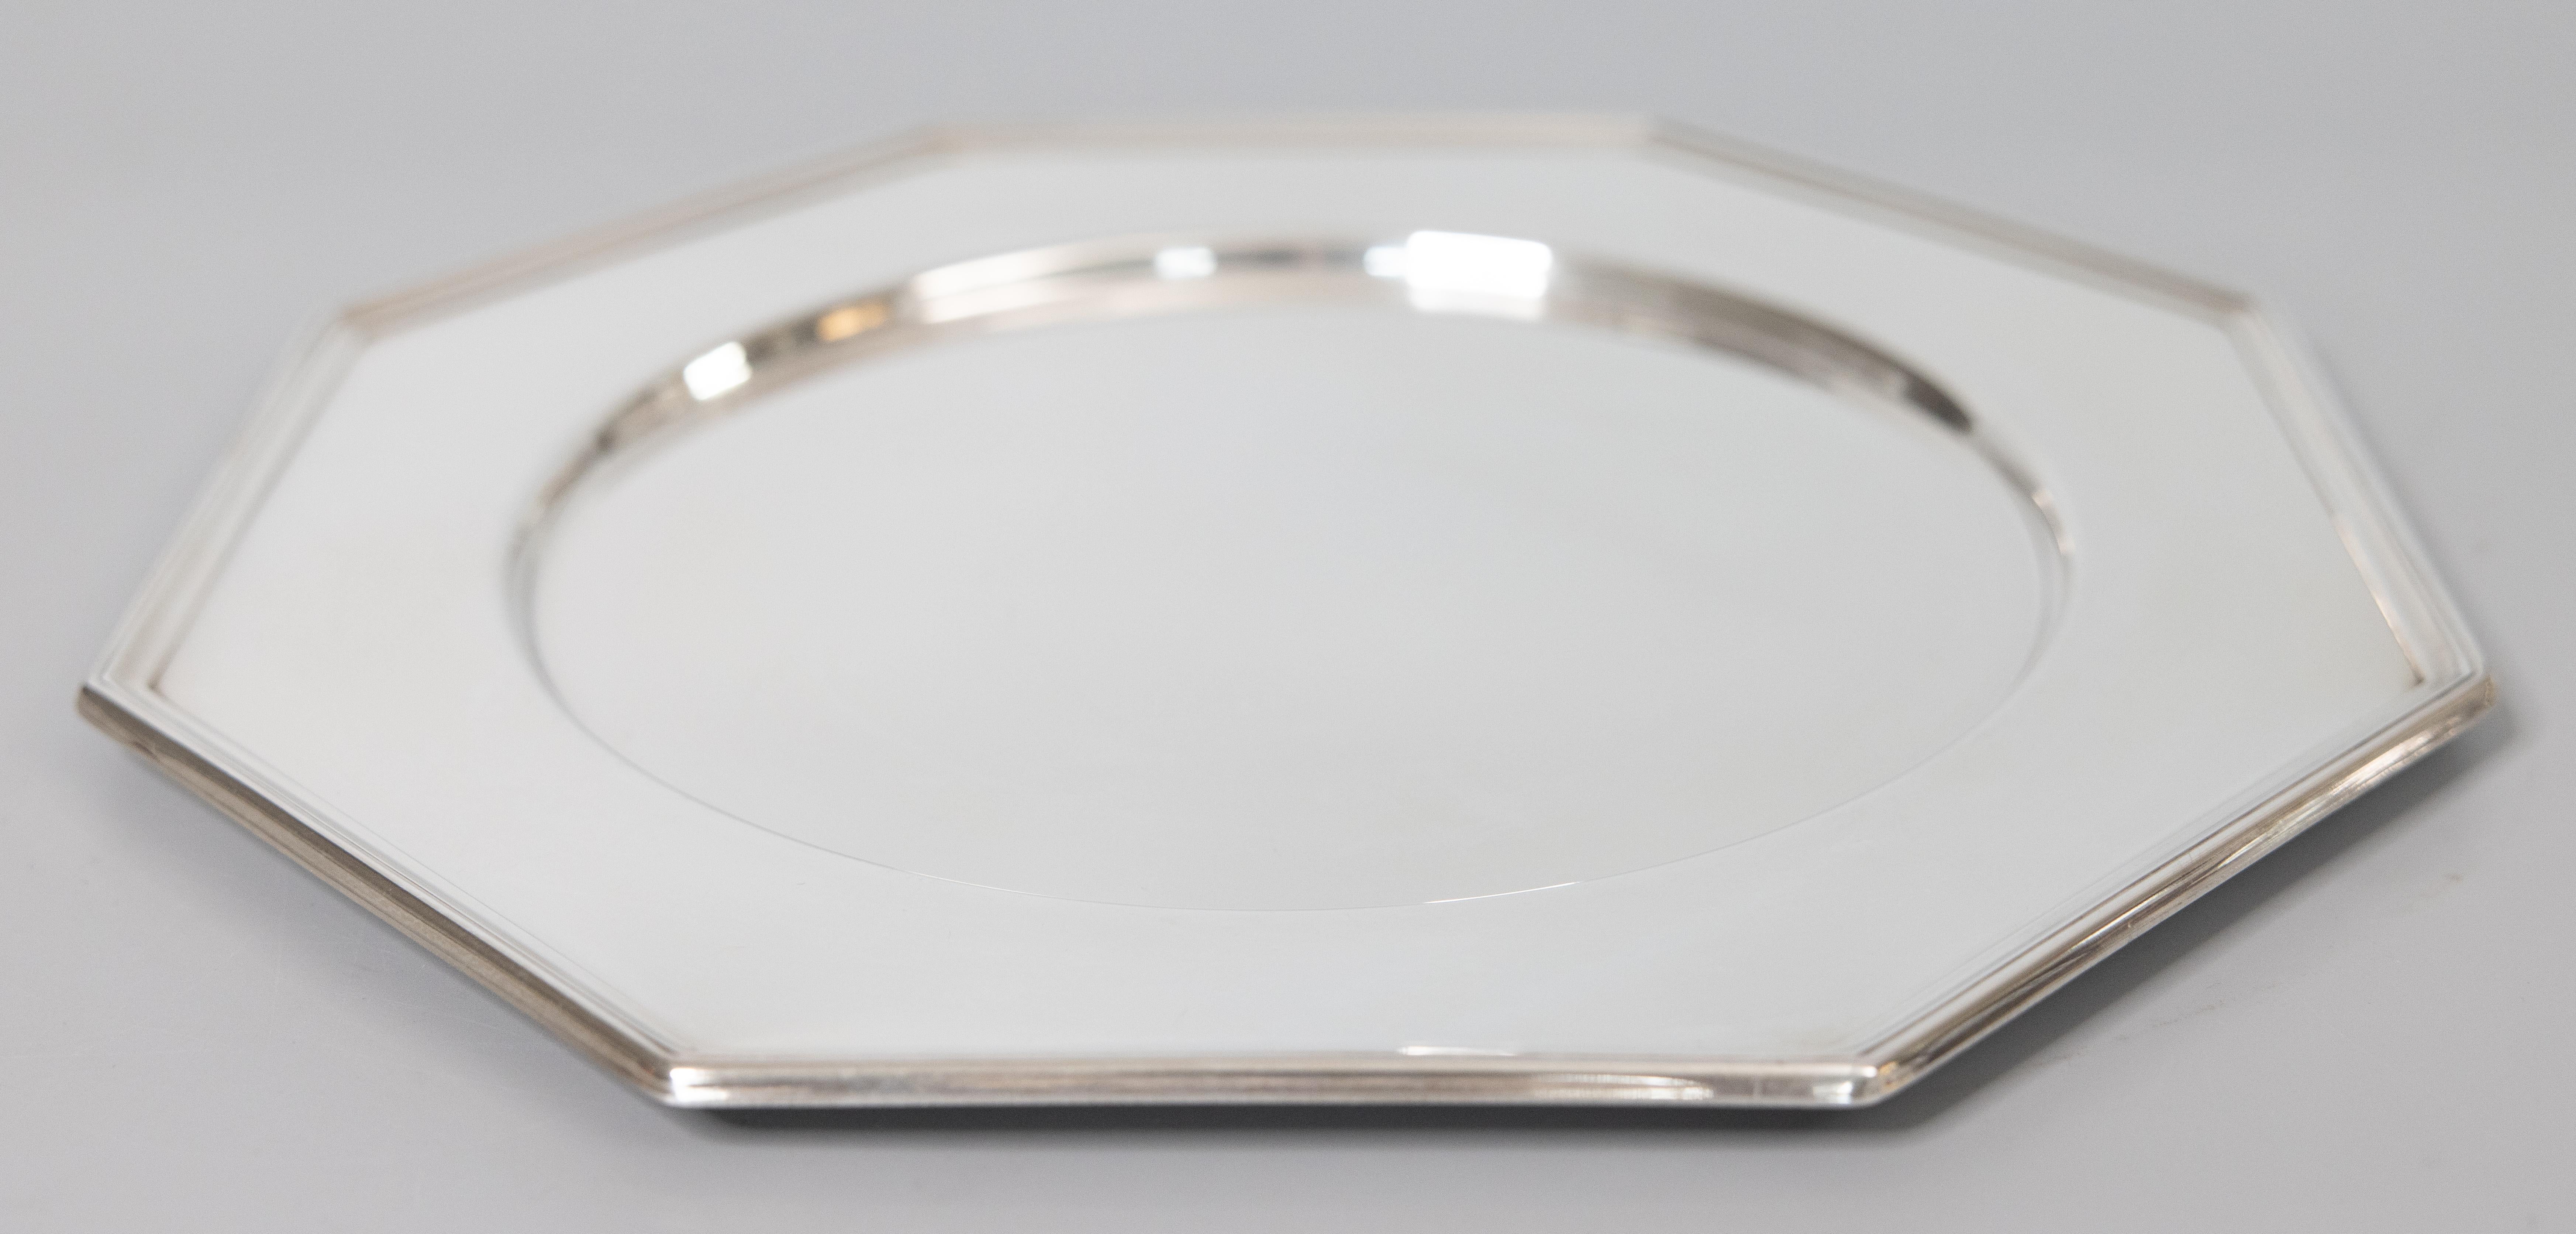 A superb English silverplated octagonal barware drinks tray. No maker's mark. This fine tray has a stylish octagonal shape would be lovely for serving or for display. Its sleek design and clean lines make it perfect for the modern